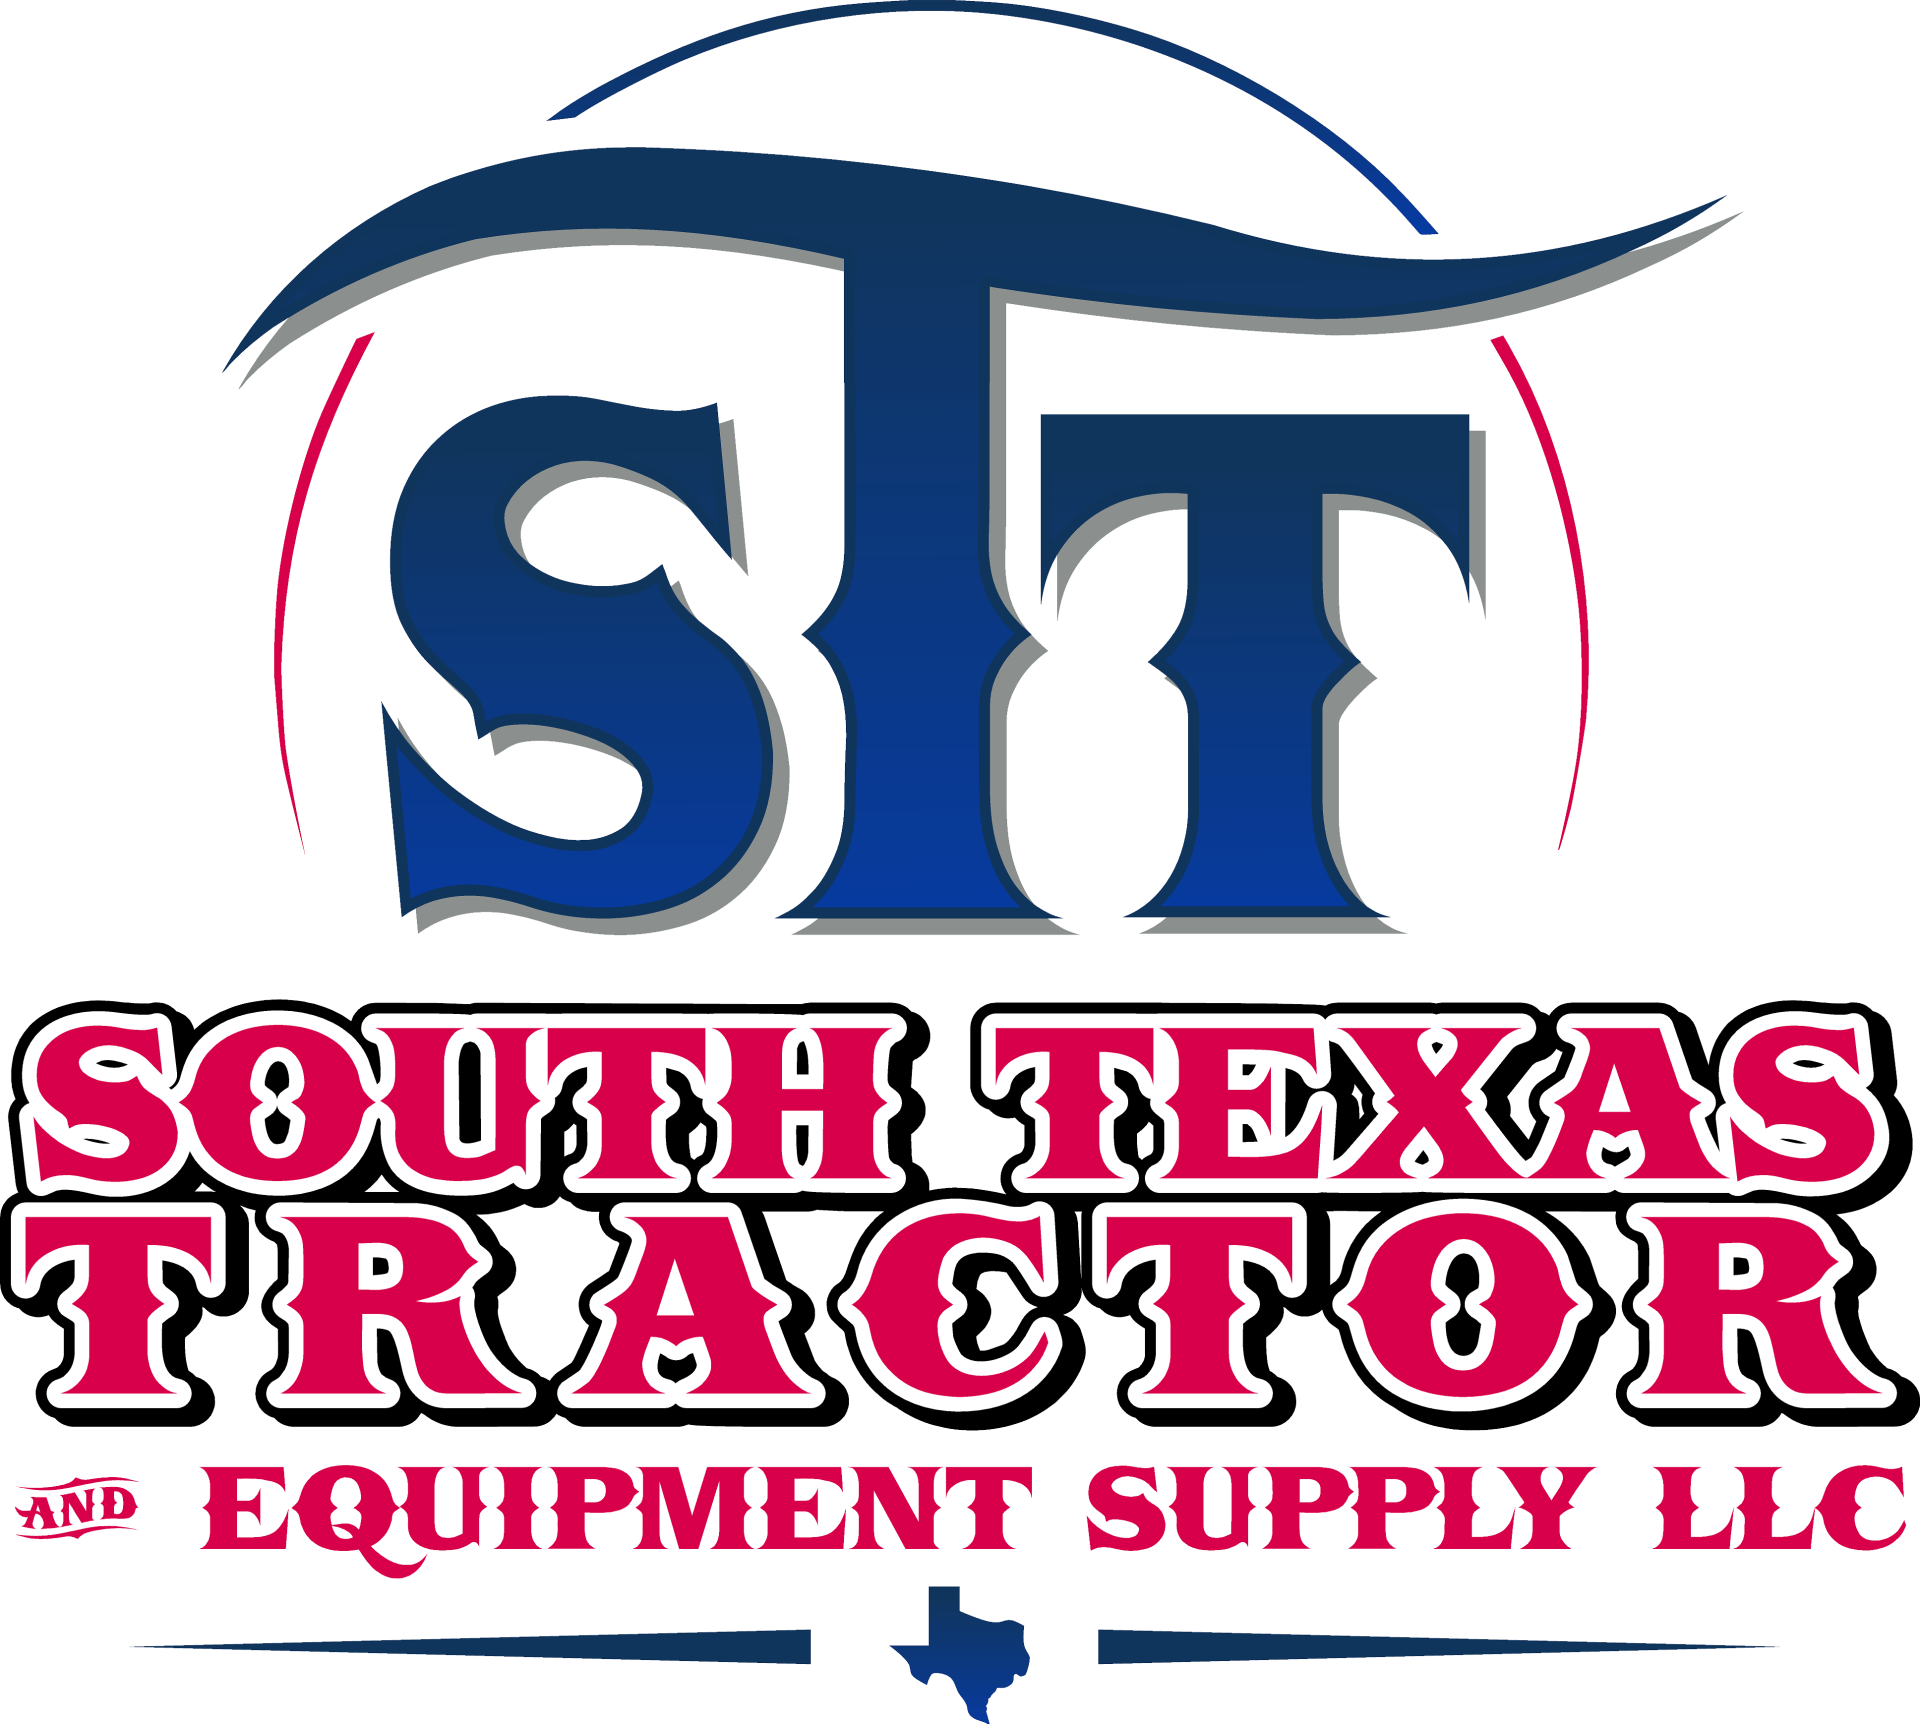 South Texas Tractor Sales